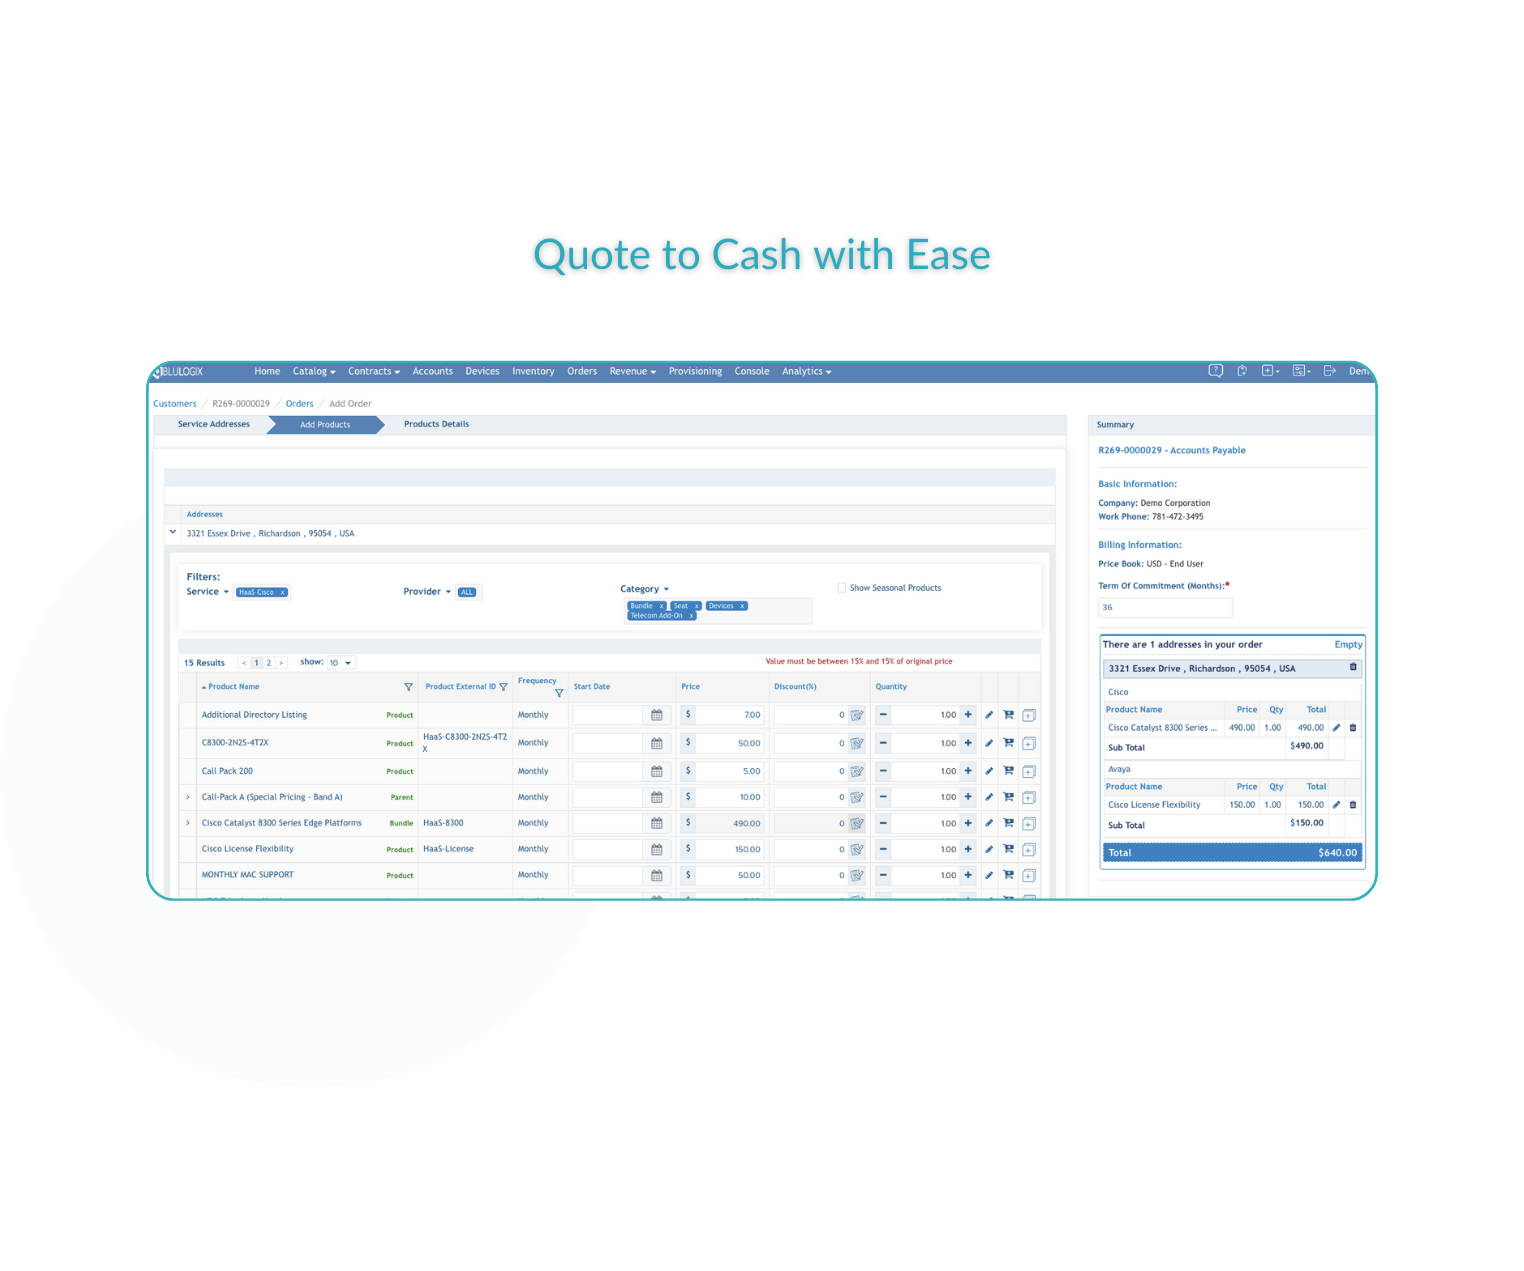 From Quote to Cash with Ease